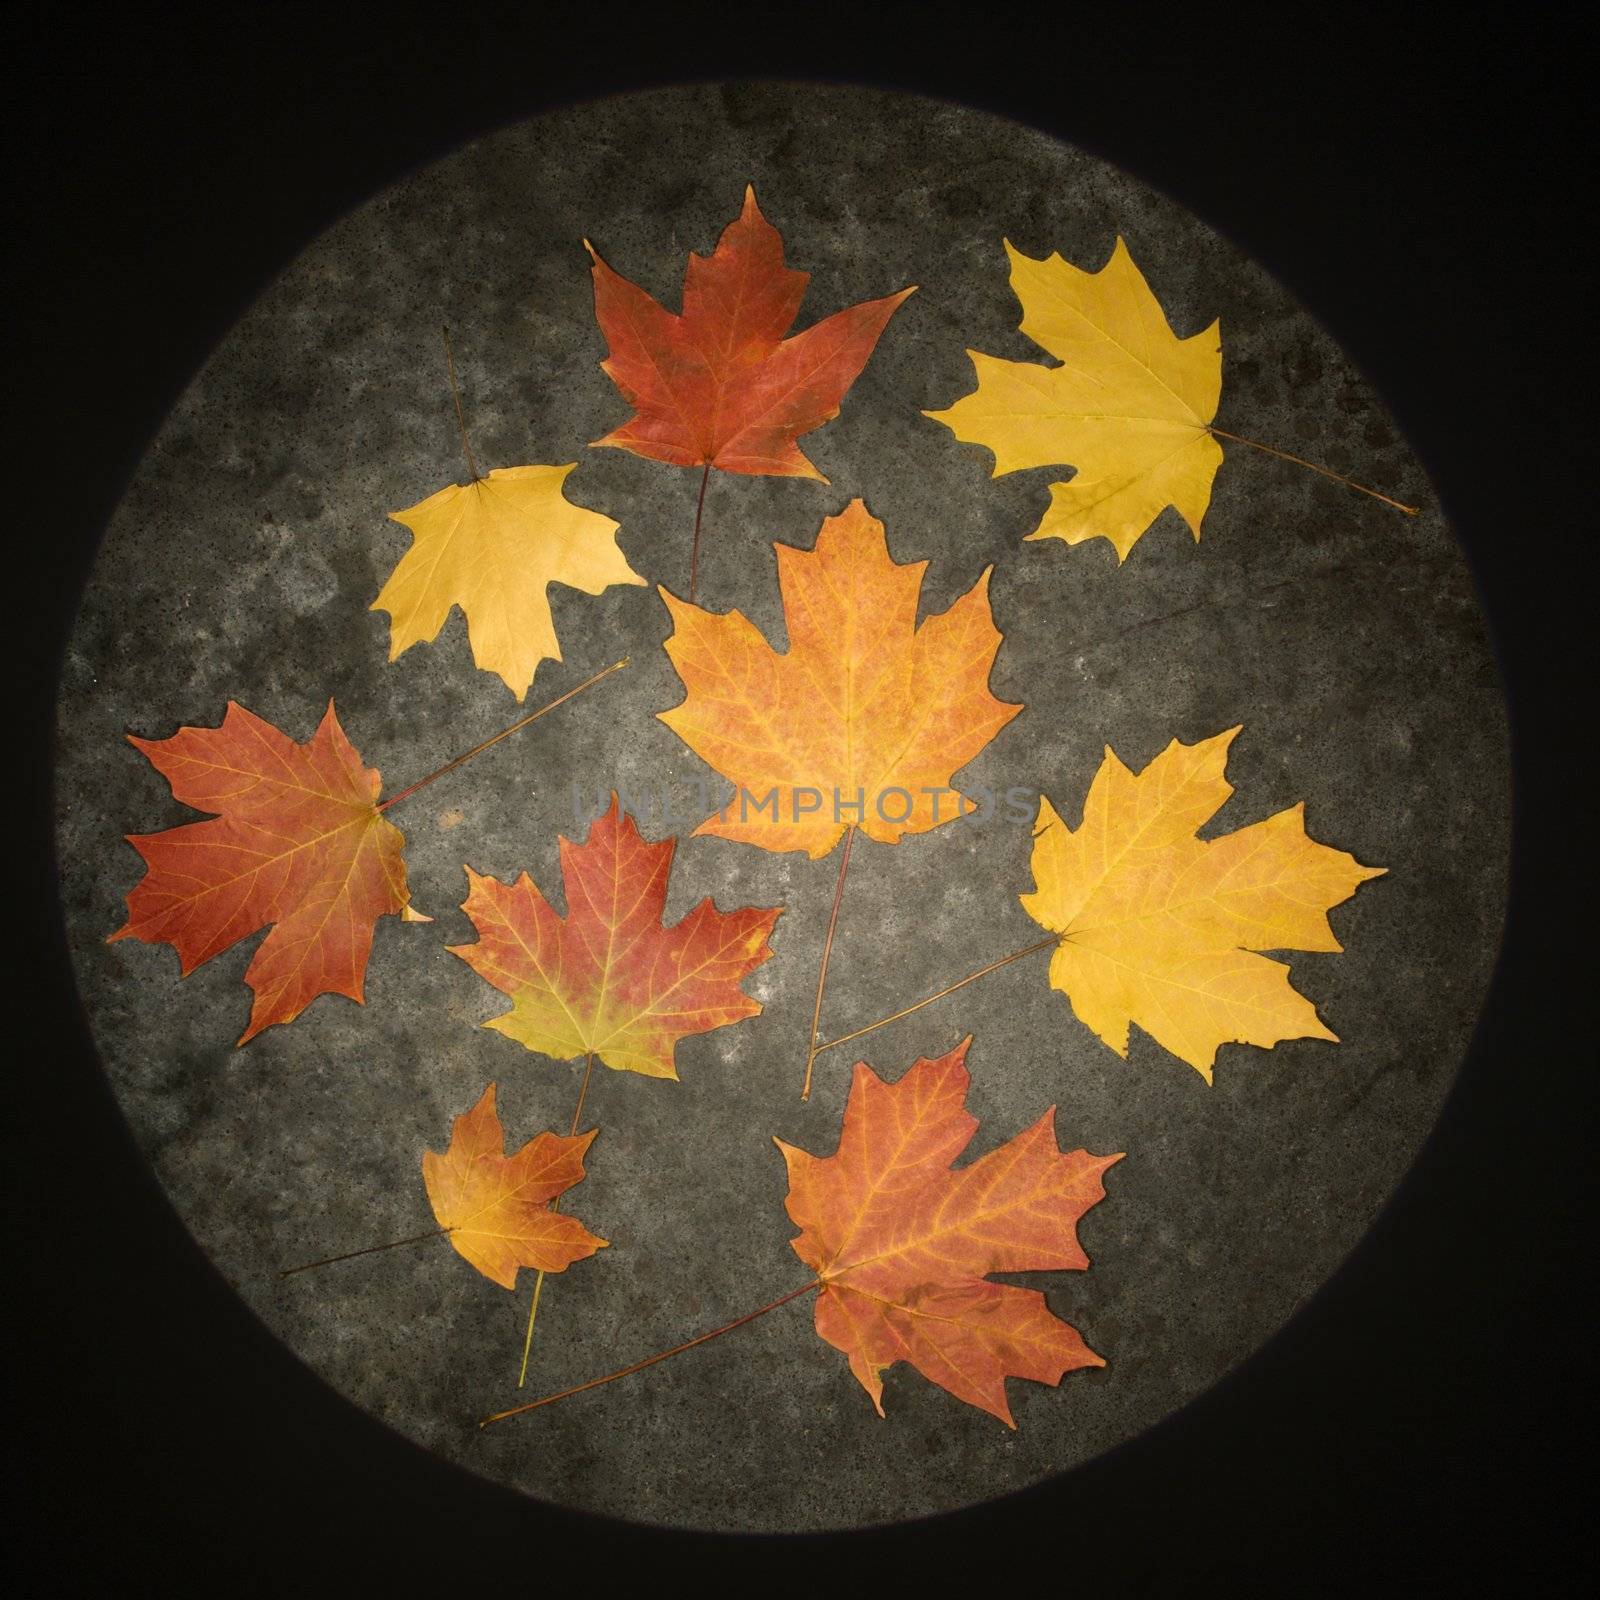 Group of multicolored Maple leaves against concrete background.